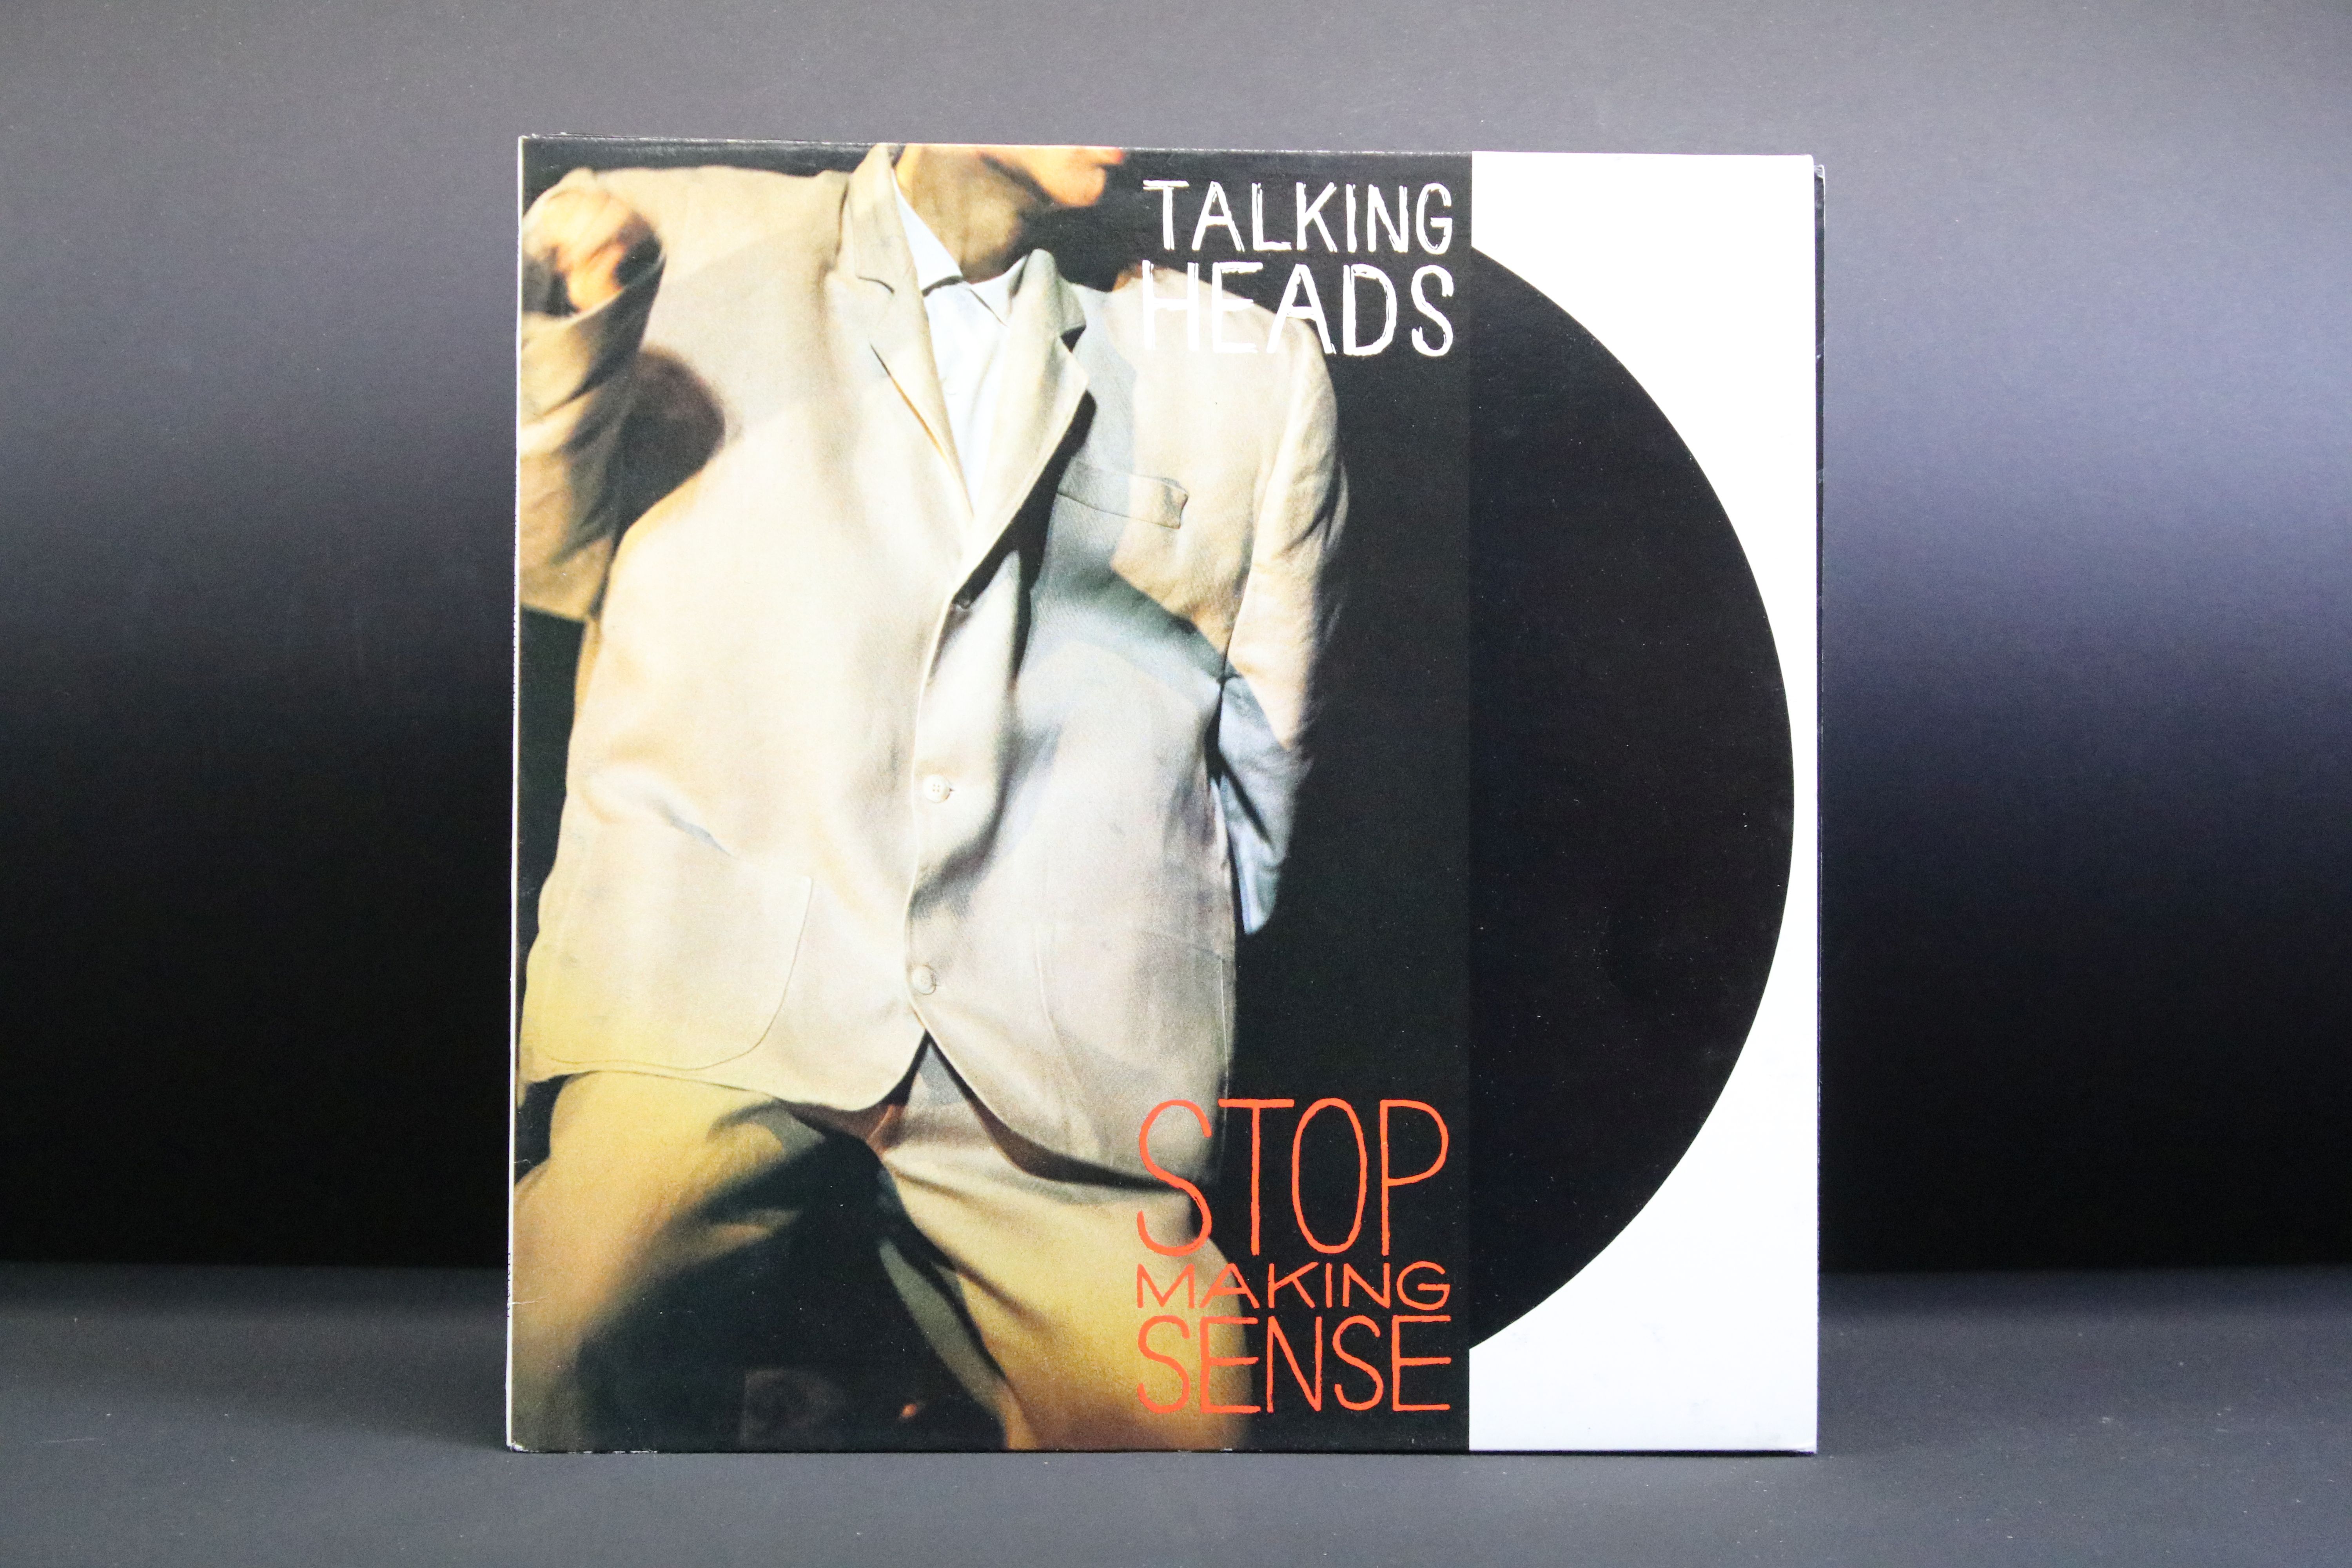 Vinyl - 6 Talking Heads LPs to include Little Creatures, Naked, Stop Making Sense, Fear Of Music and - Image 6 of 7